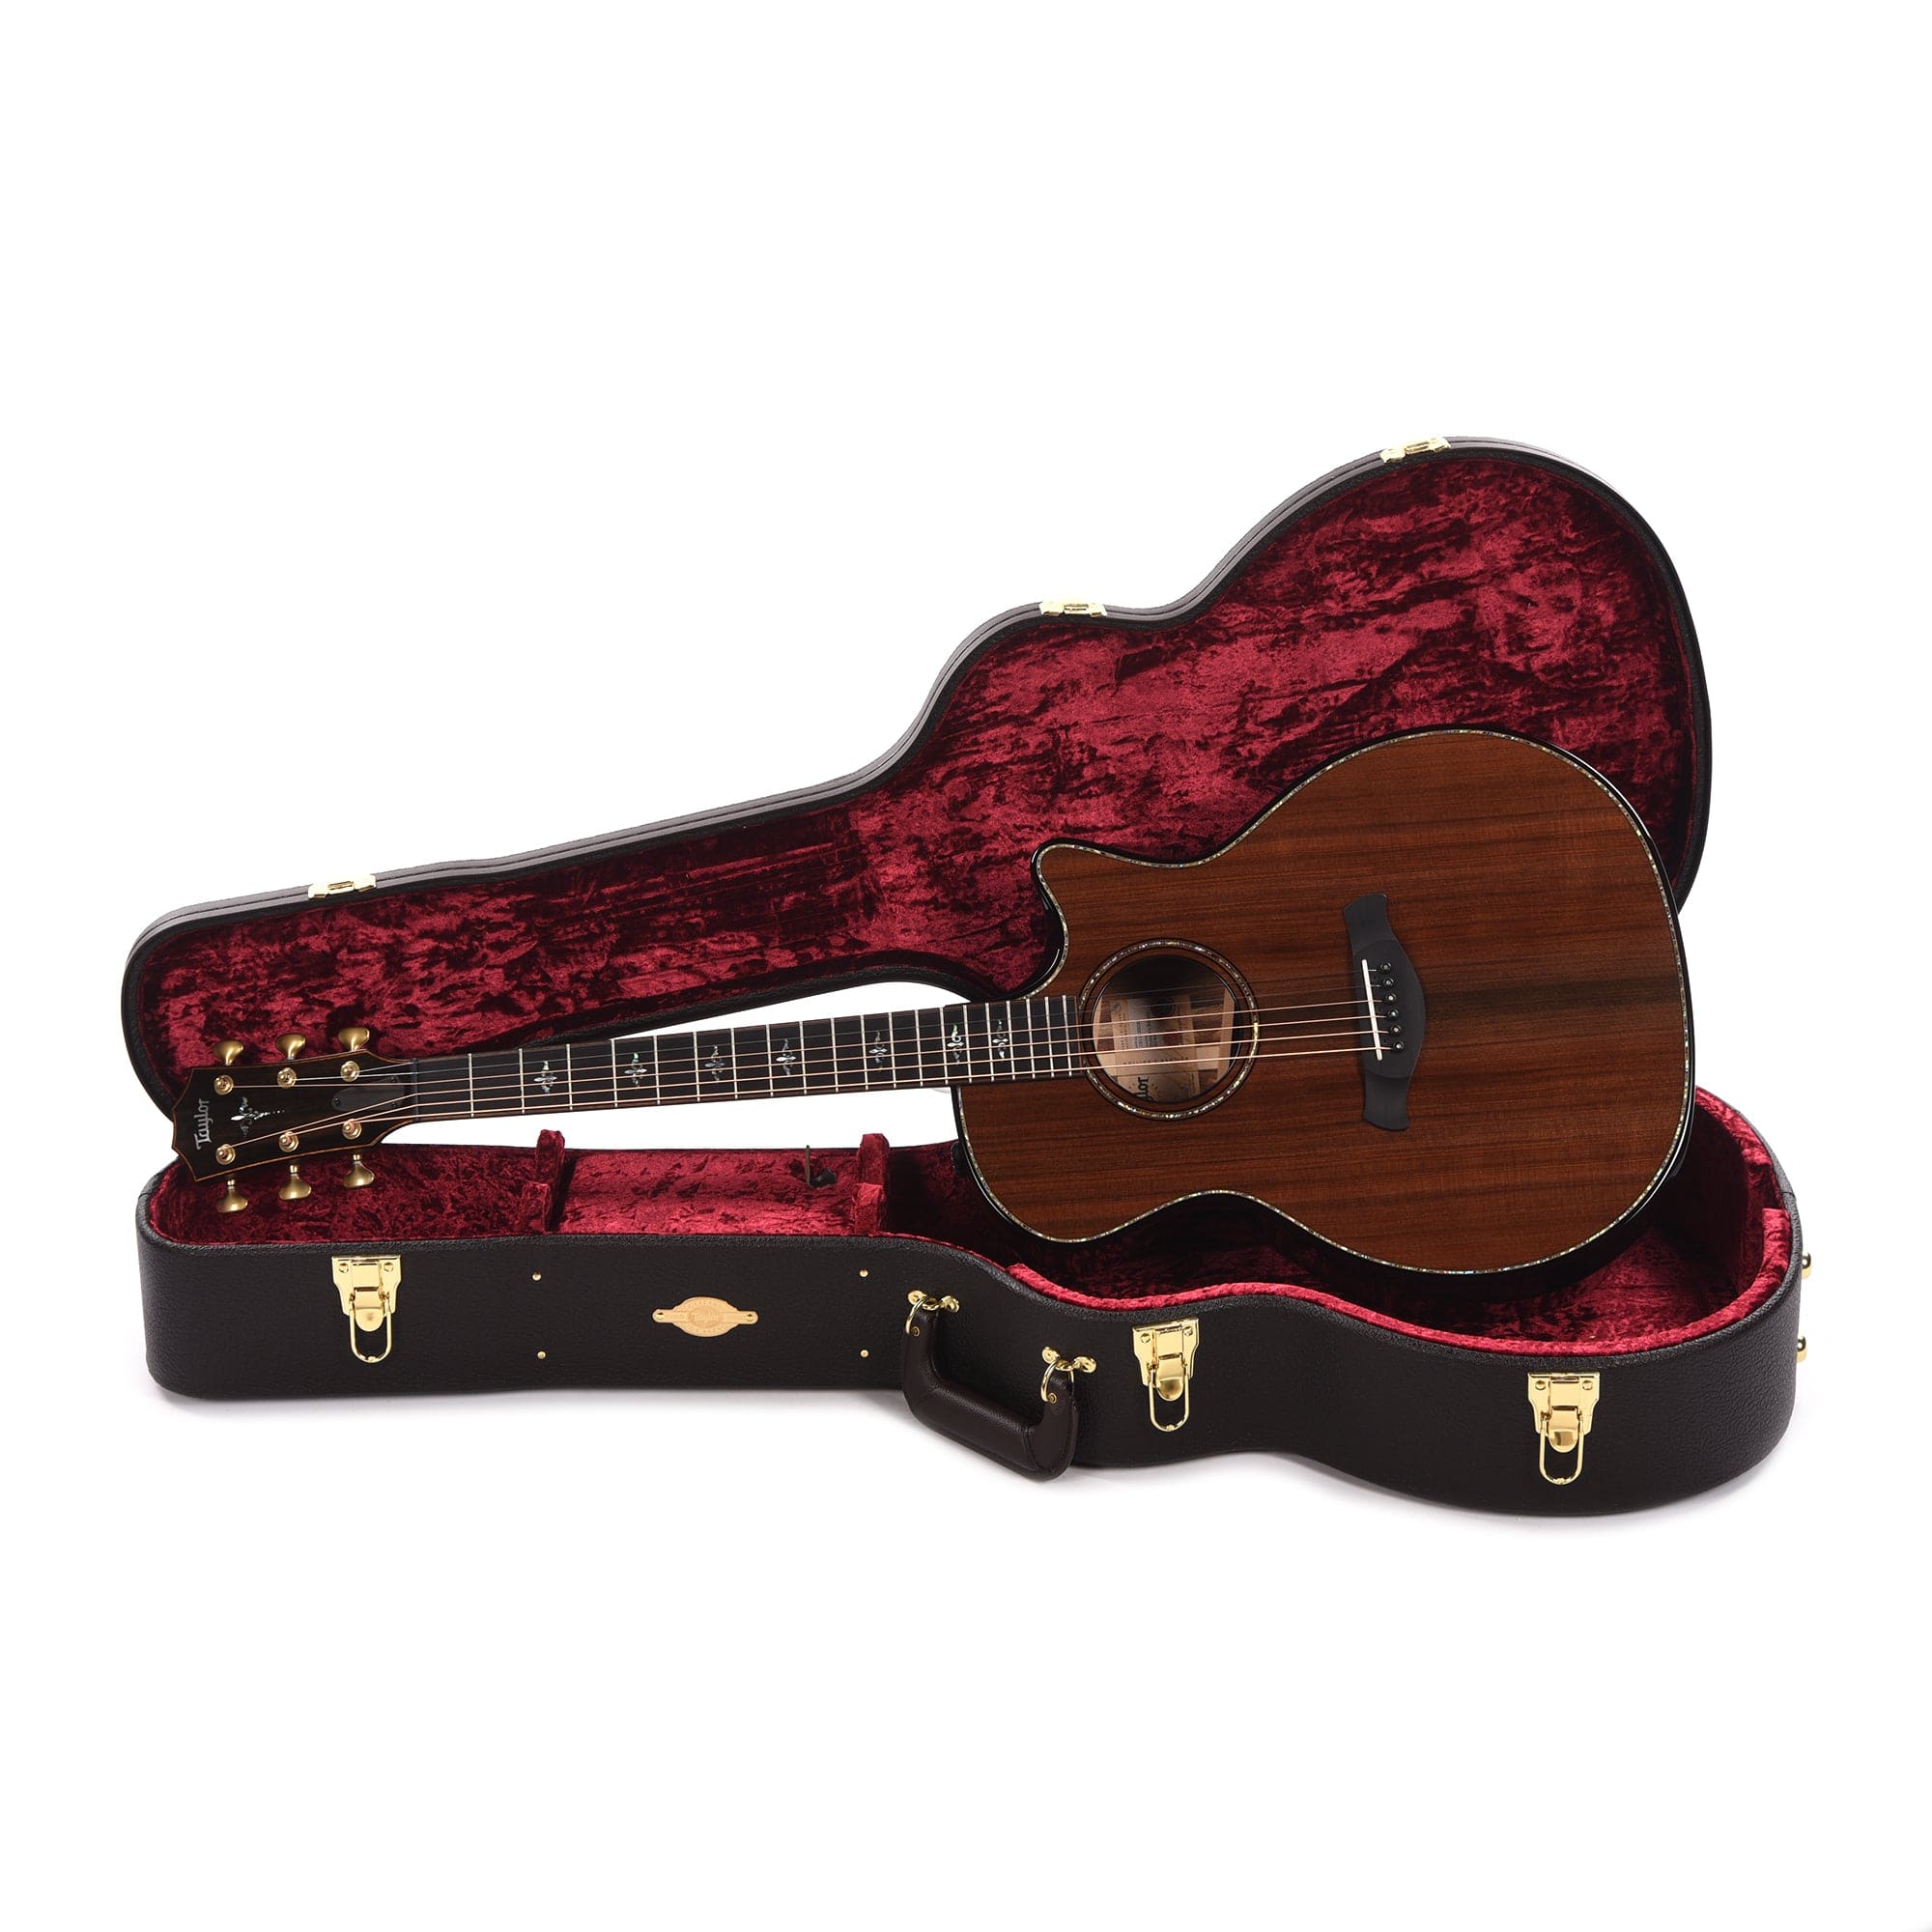 Taylor Builder's Edition 914ce Grand Auditorium Stripy Sinker Redwood/Rosewood Natural Top (Serial #1211133083) Acoustic Guitars / OM and Auditorium